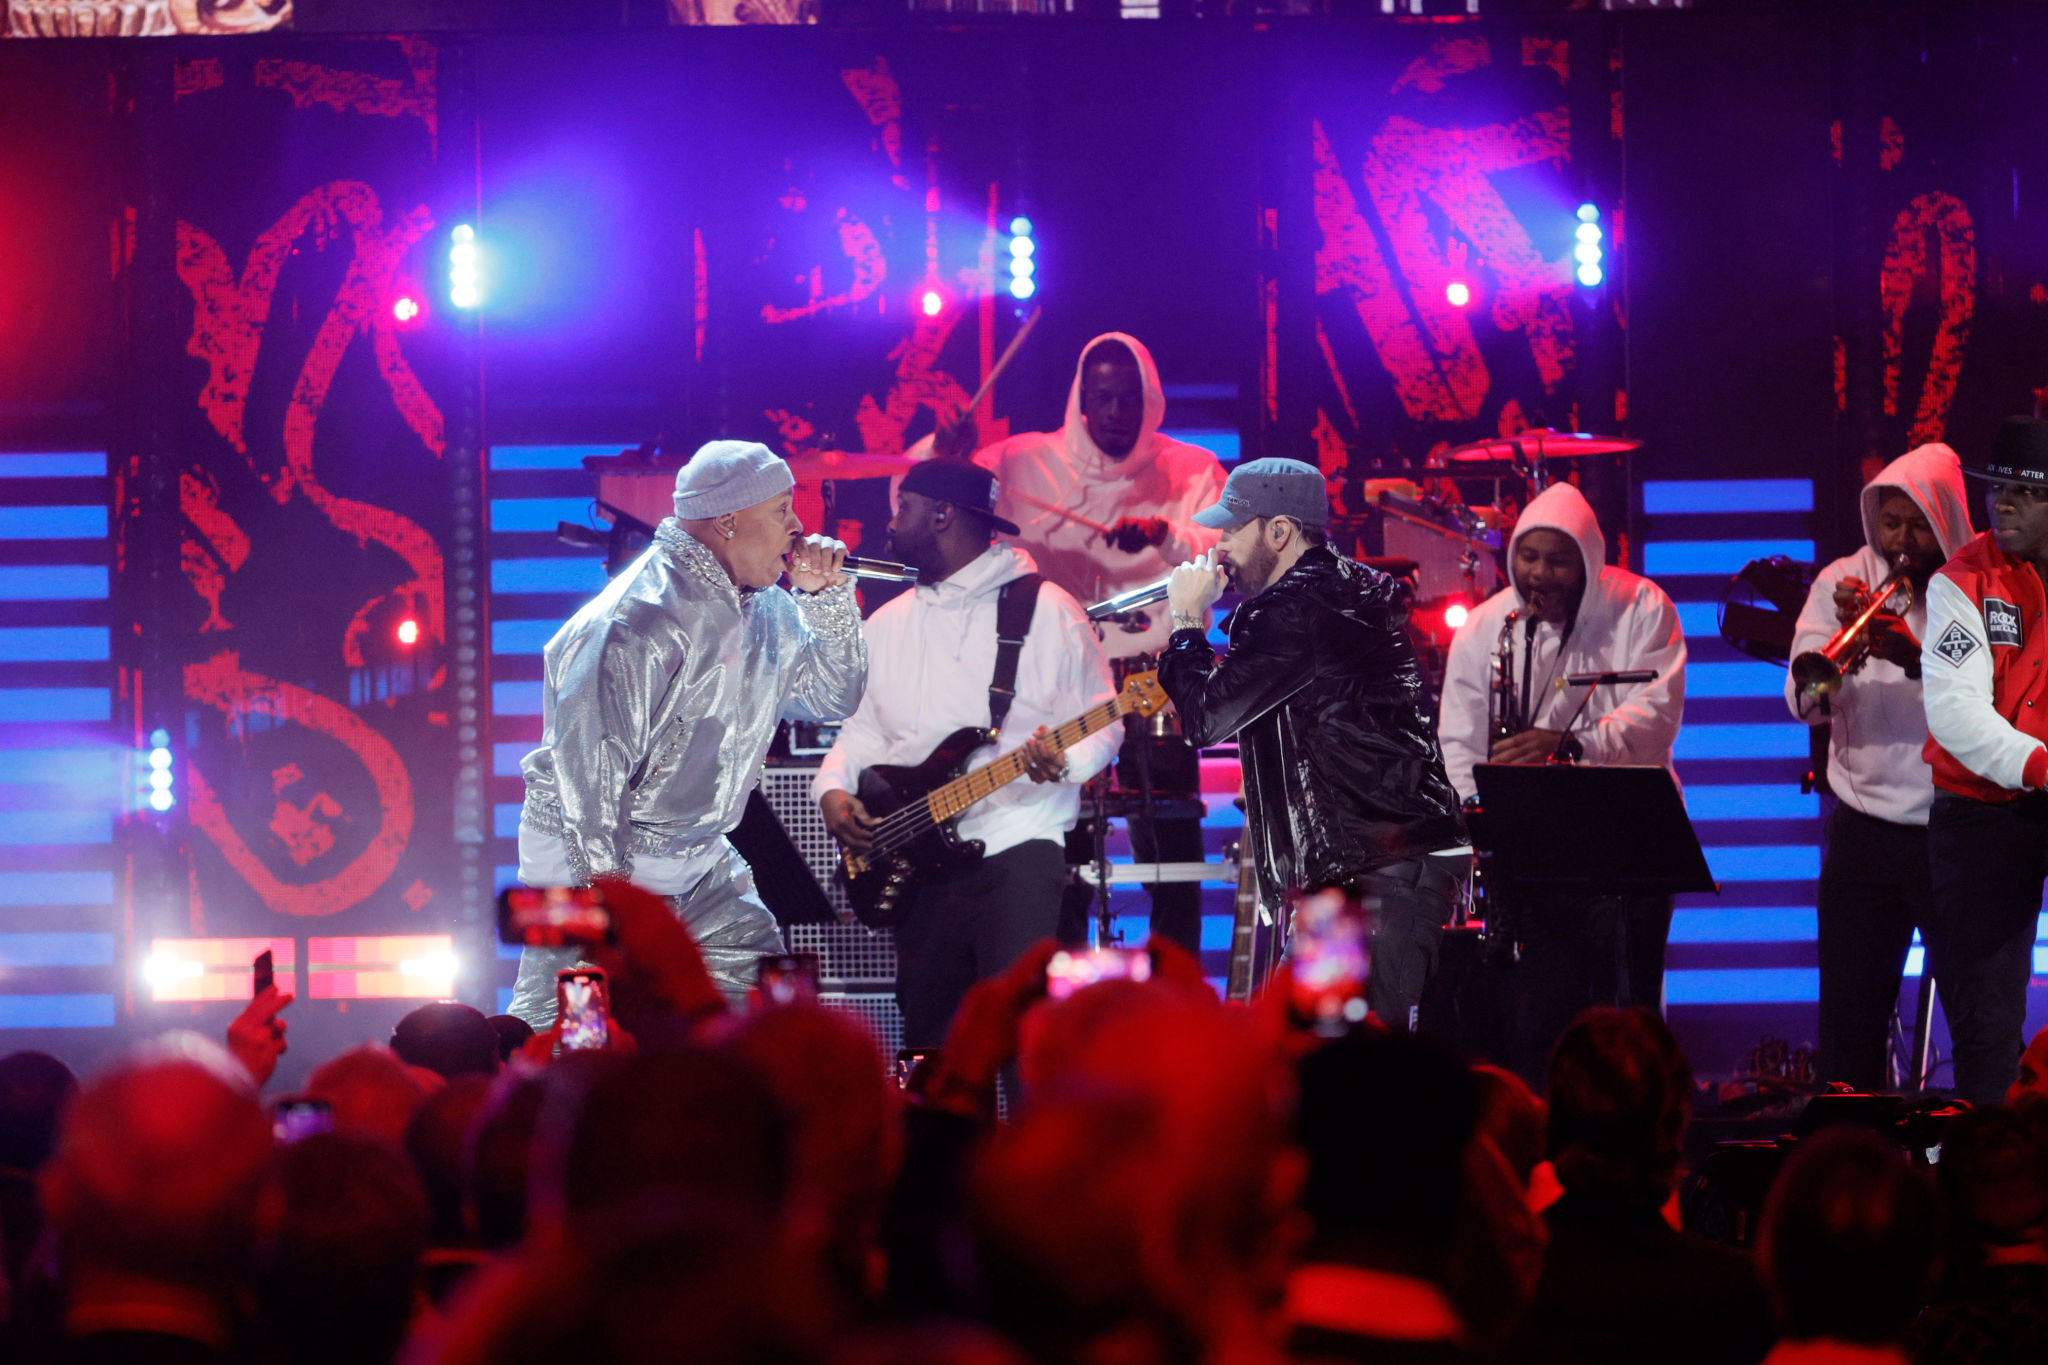 CLEVELAND, OHIO - OCTOBER 30: LL Cool J (L) and Eminem perform onstage during the 36th Annual Rock & Roll Hall Of Fame Induction Ceremony at Rocket Mortgage Fieldhouse on October 30, 2021 in Cleveland, Ohio. (Photo by Michael Loccisano/Getty Images for The Rock and Roll Hall of Fame )